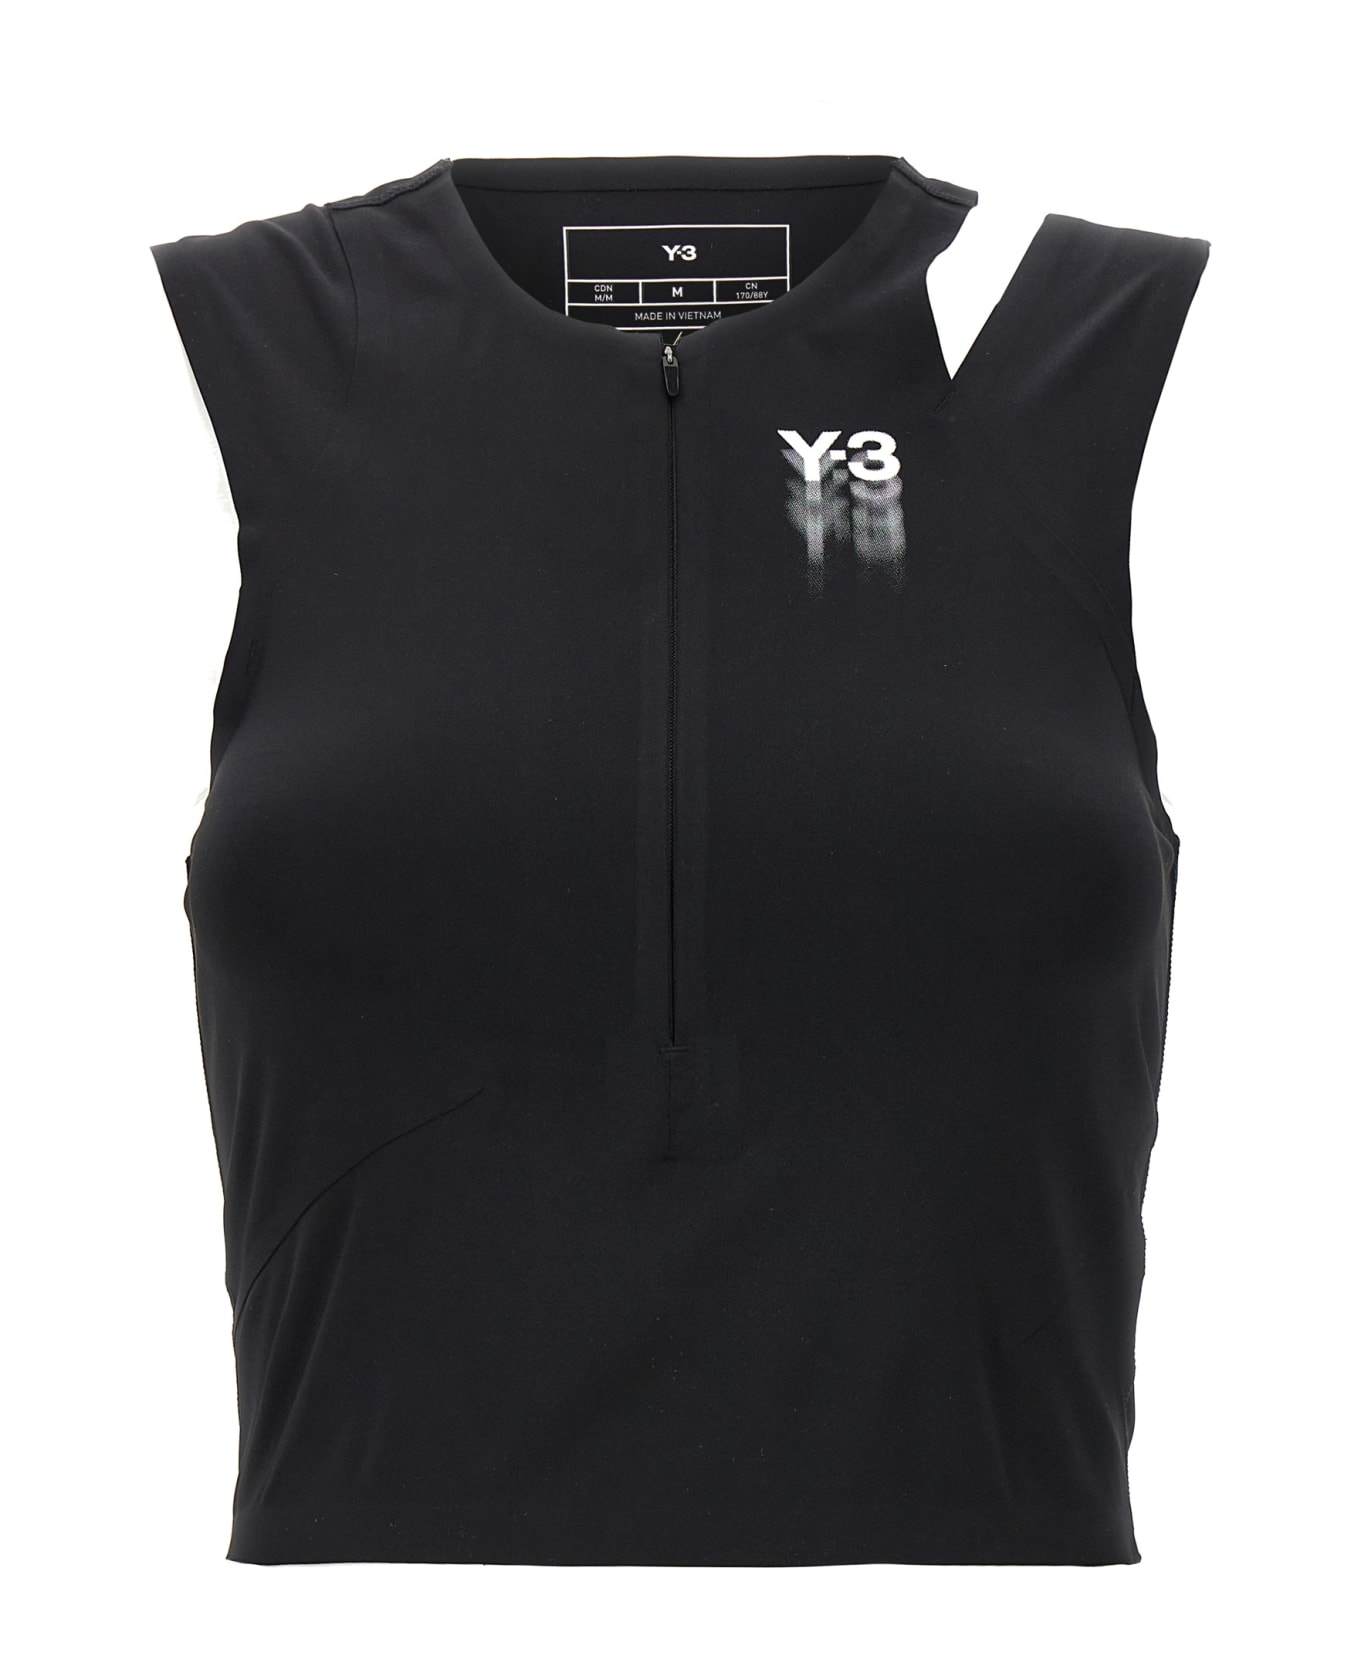 Y-3 'running' Sporty Top - Black   トップス